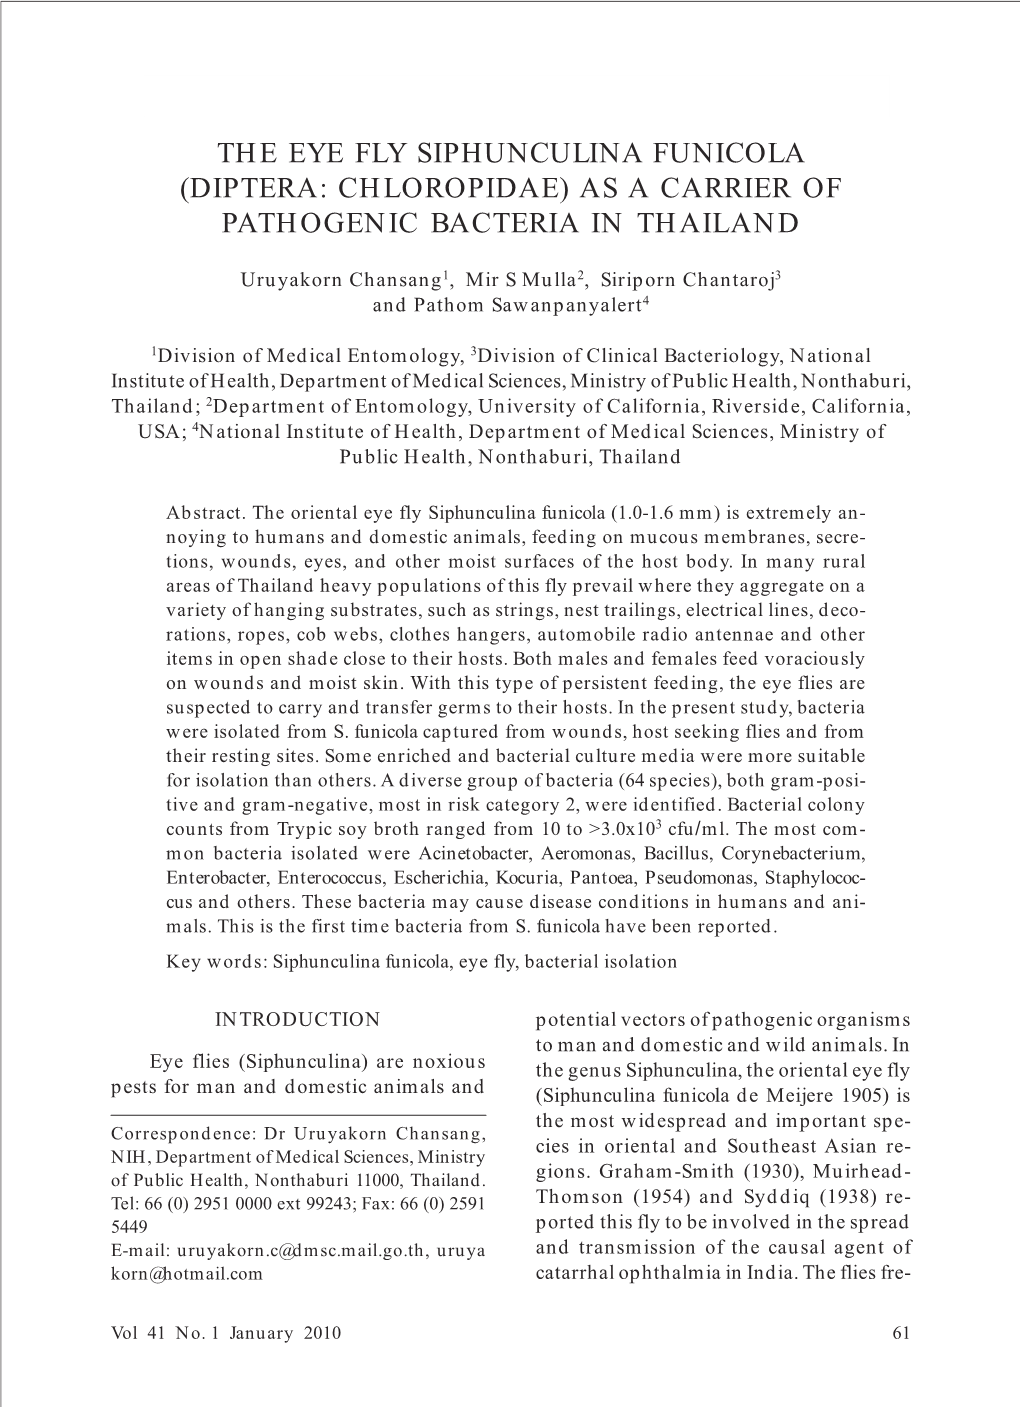 The Eye Fly Siphunculina Funicola (Diptera: Chloropidae) As a Carrier of Pathogenic Bacteria in Thailand